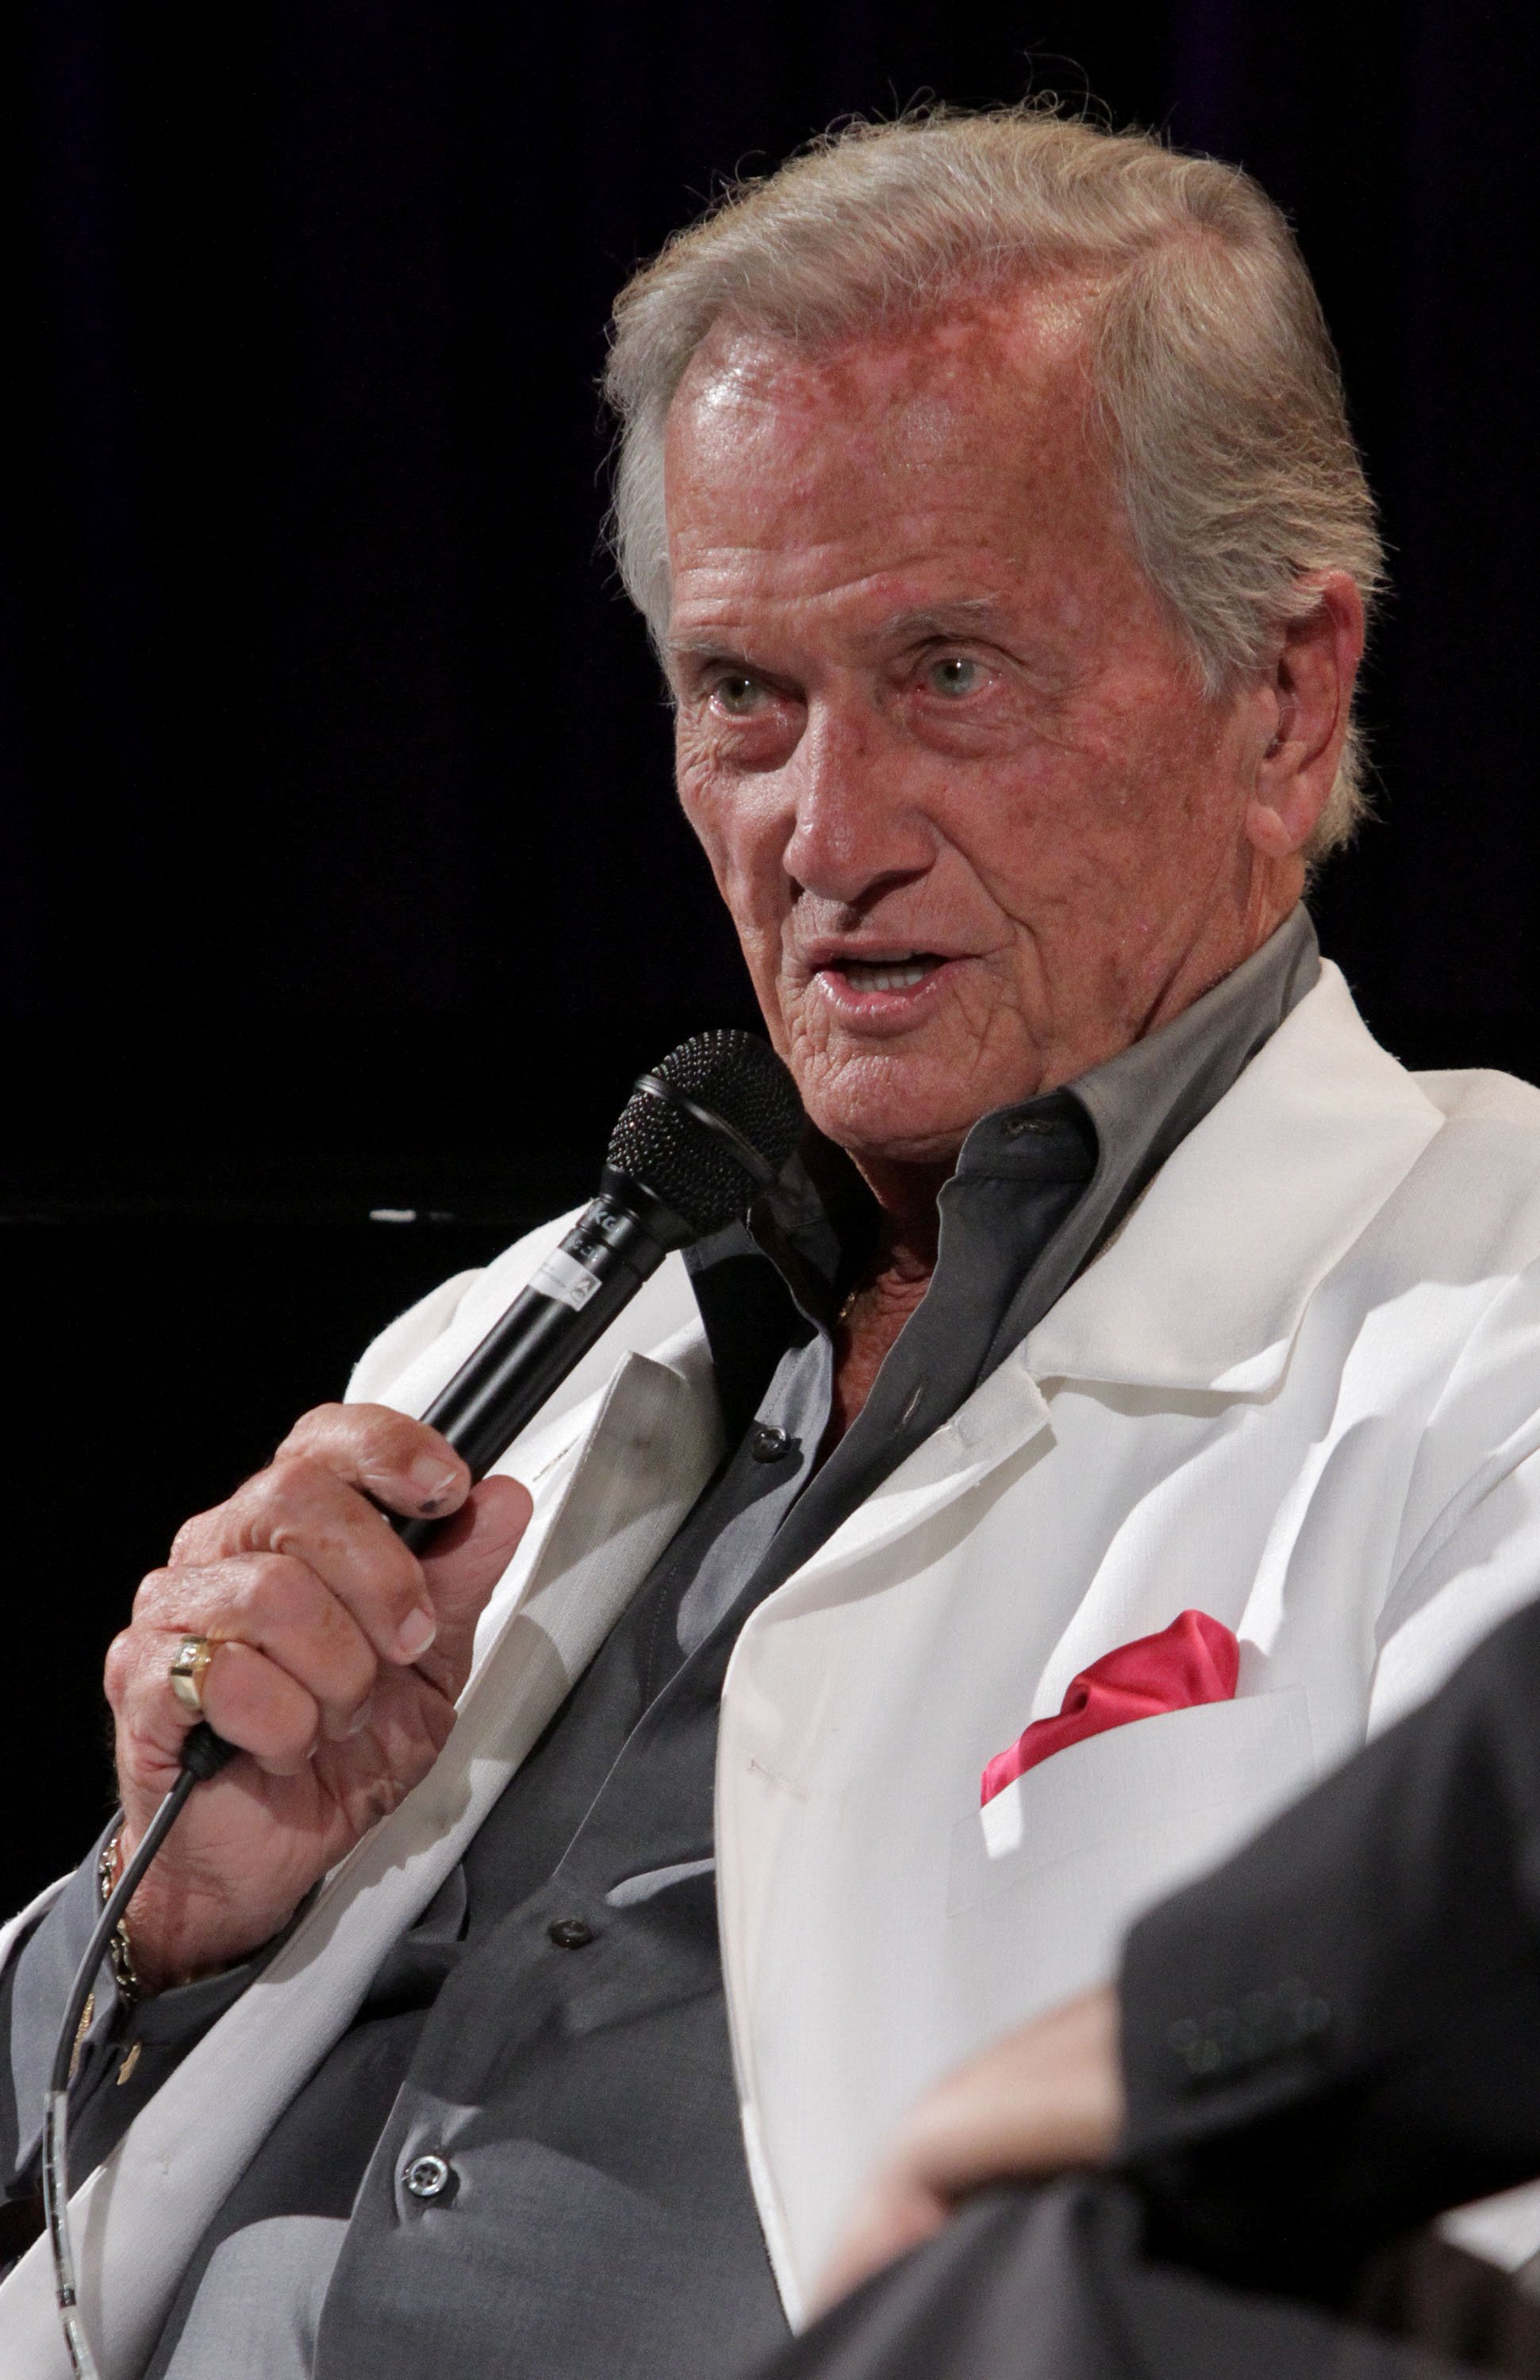 Singer Pat Boone speaks onstage at An Evening With Pat Boone at The GRAMMY Museum on June 2, 2015 in Los Angeles, California. | Source: Getty Images